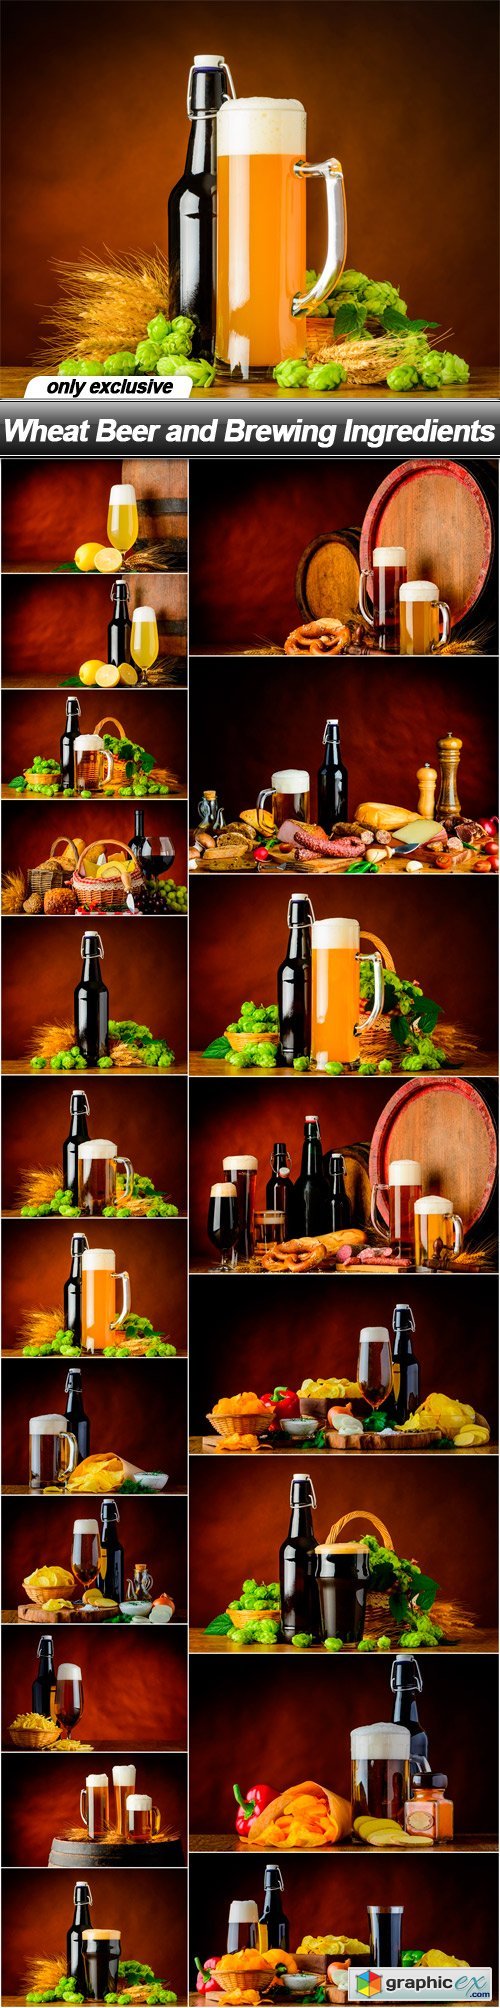 Wheat Beer and Brewing Ingredients - 20 UHQ JPEG